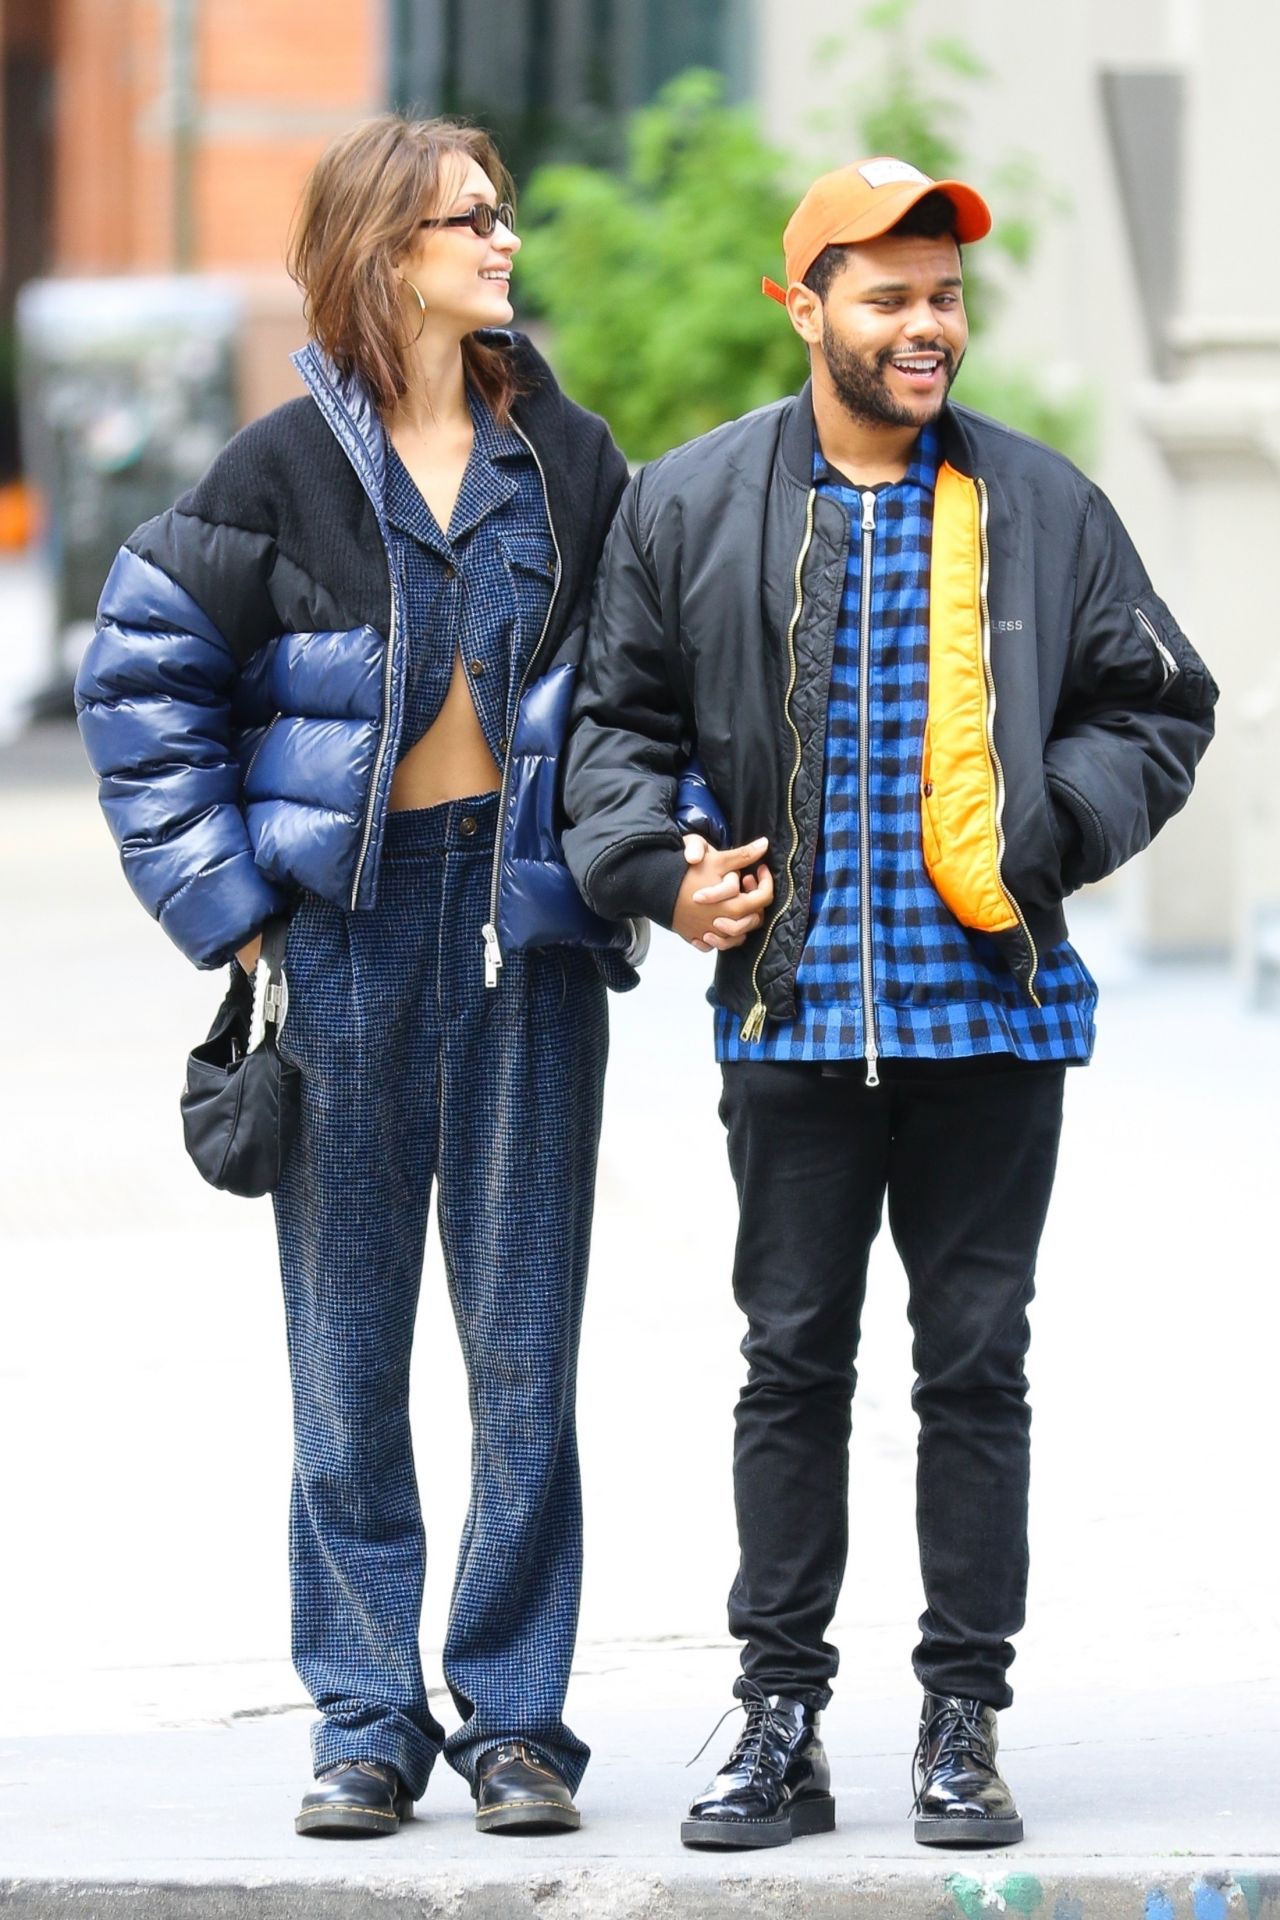 bella-hadid-and-the-weeknd-out-in-new-york-city-10-29-2018-3.jpg